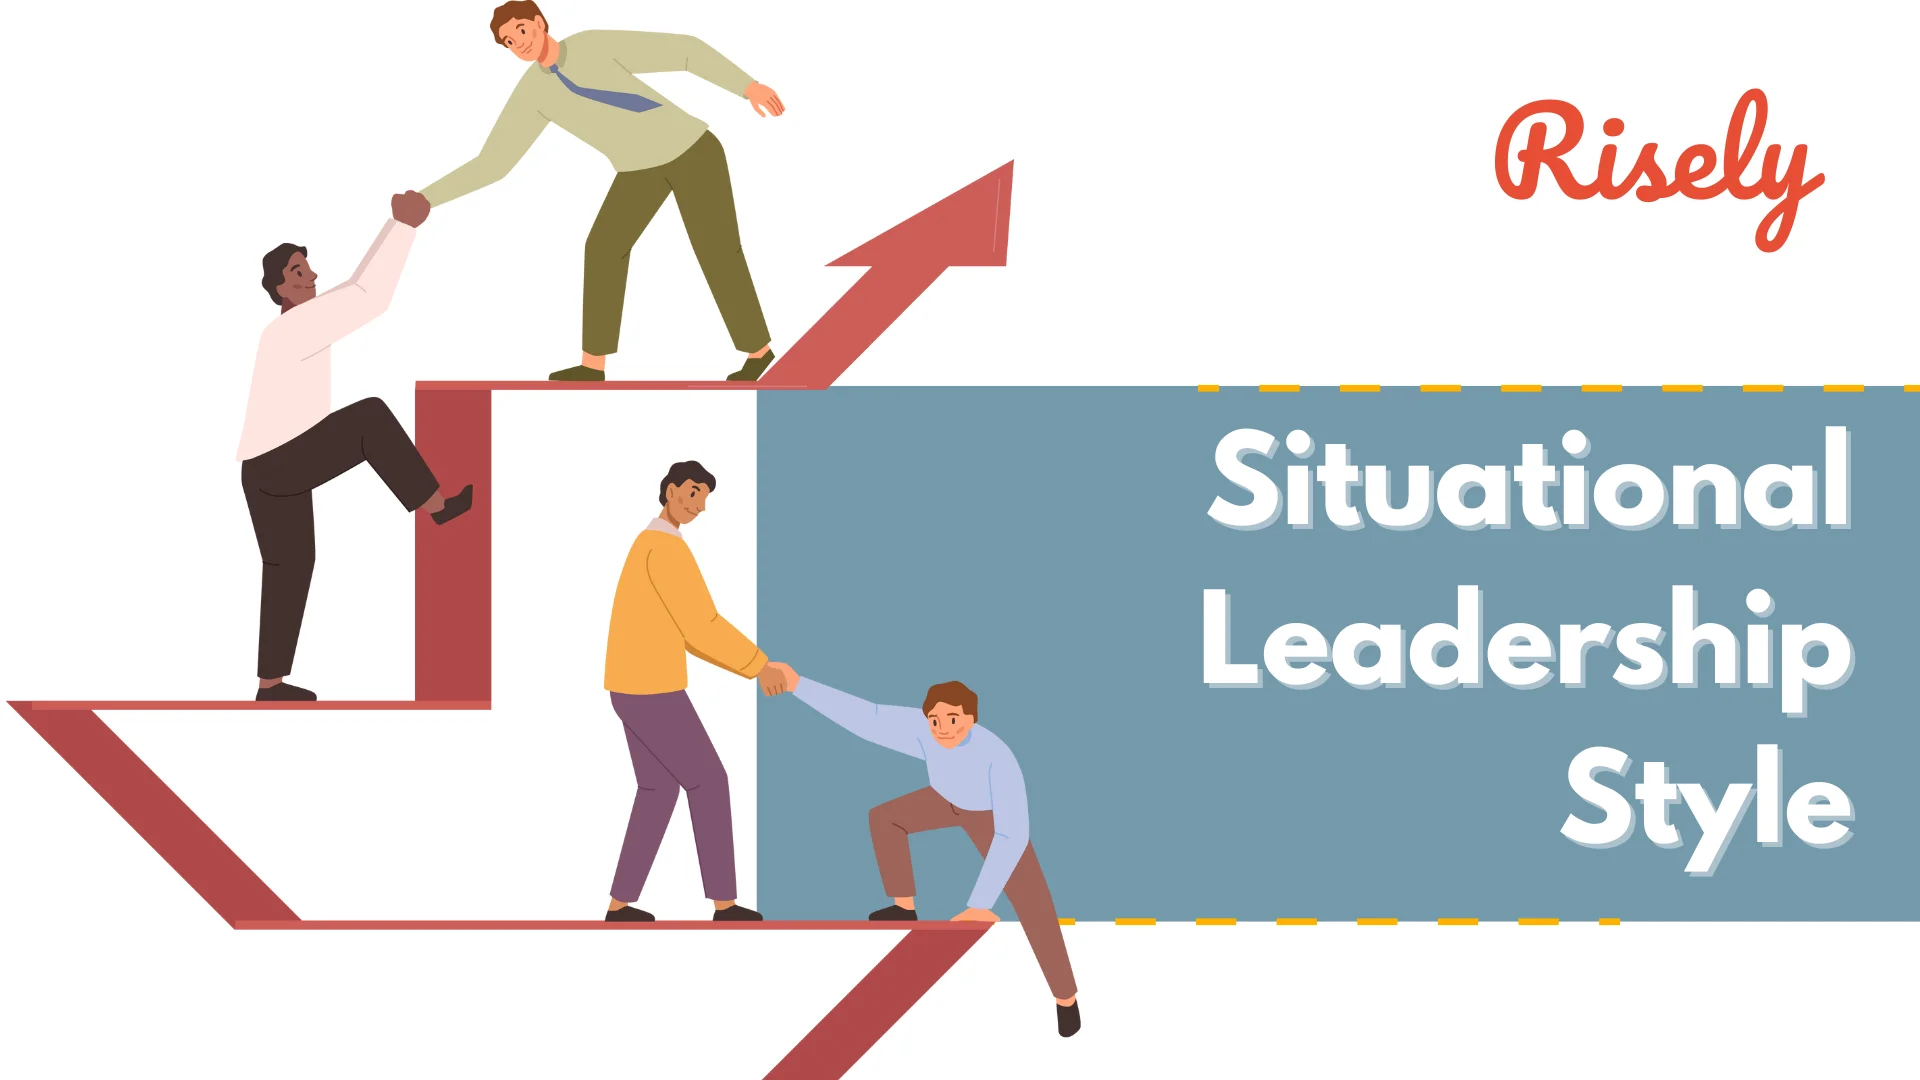 5 Keys to Adopting a Situational Leadership Style